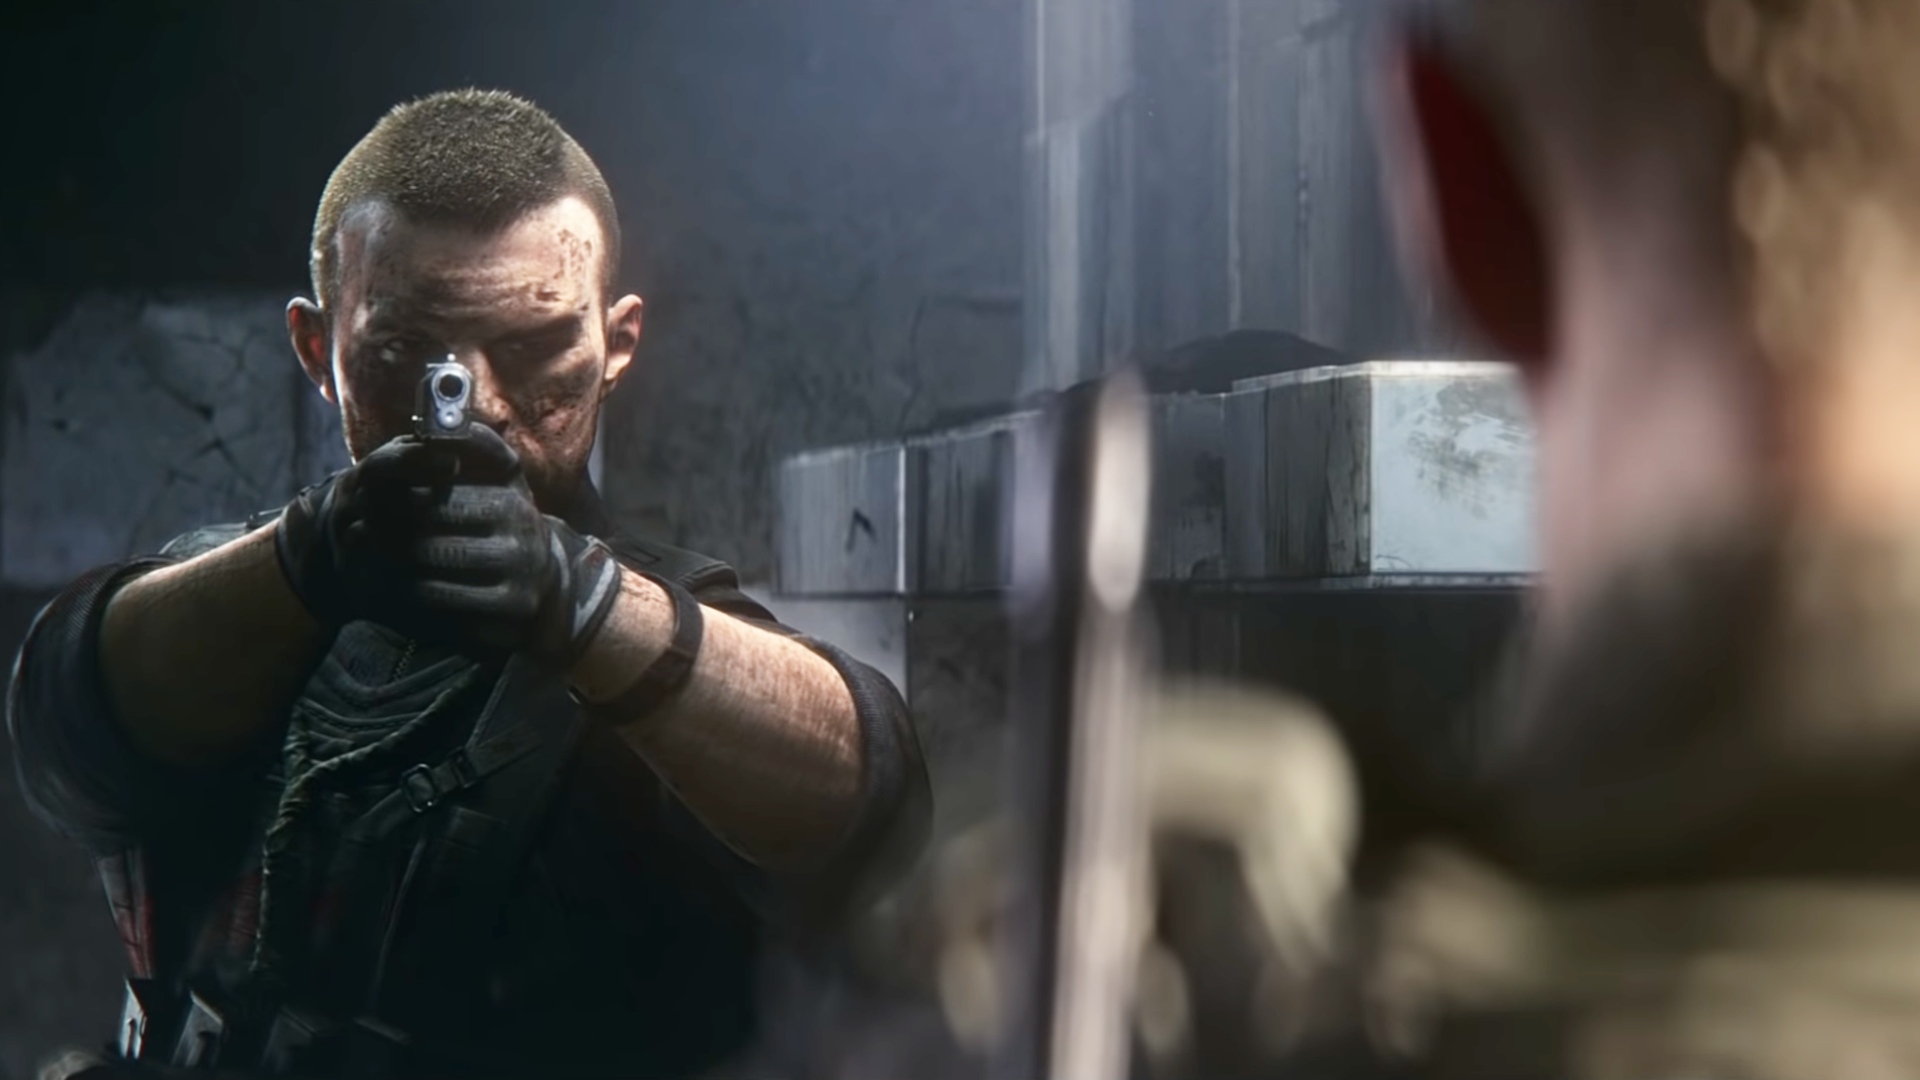 An Escape From Tarkov character points a gun at a soldier in a cinematic